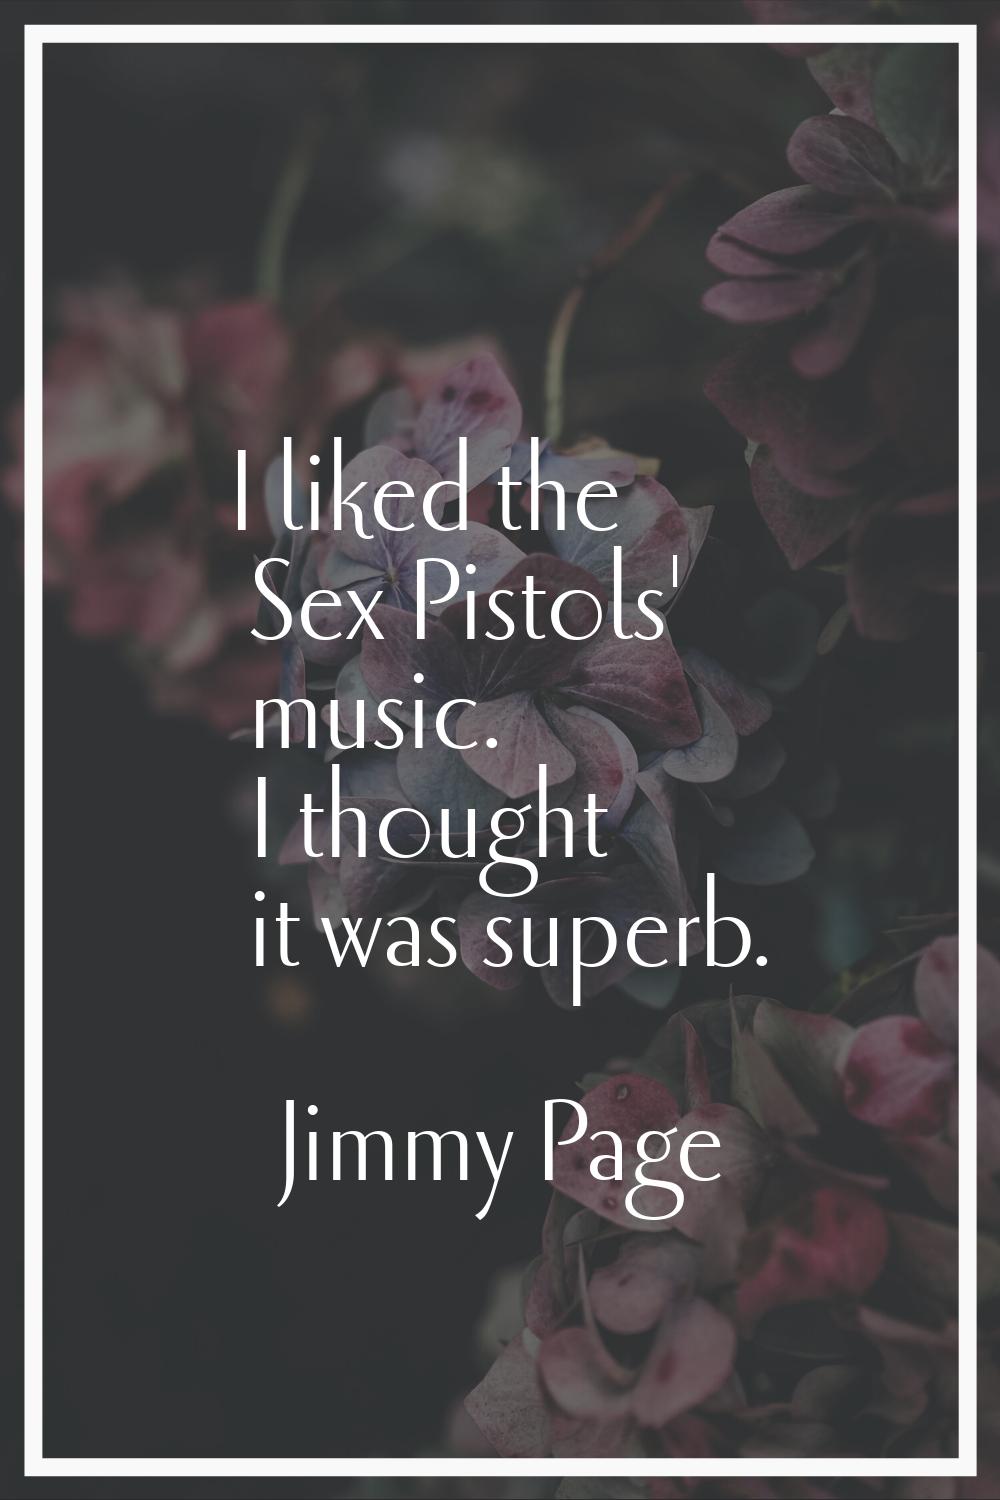 I liked the Sex Pistols' music. I thought it was superb.